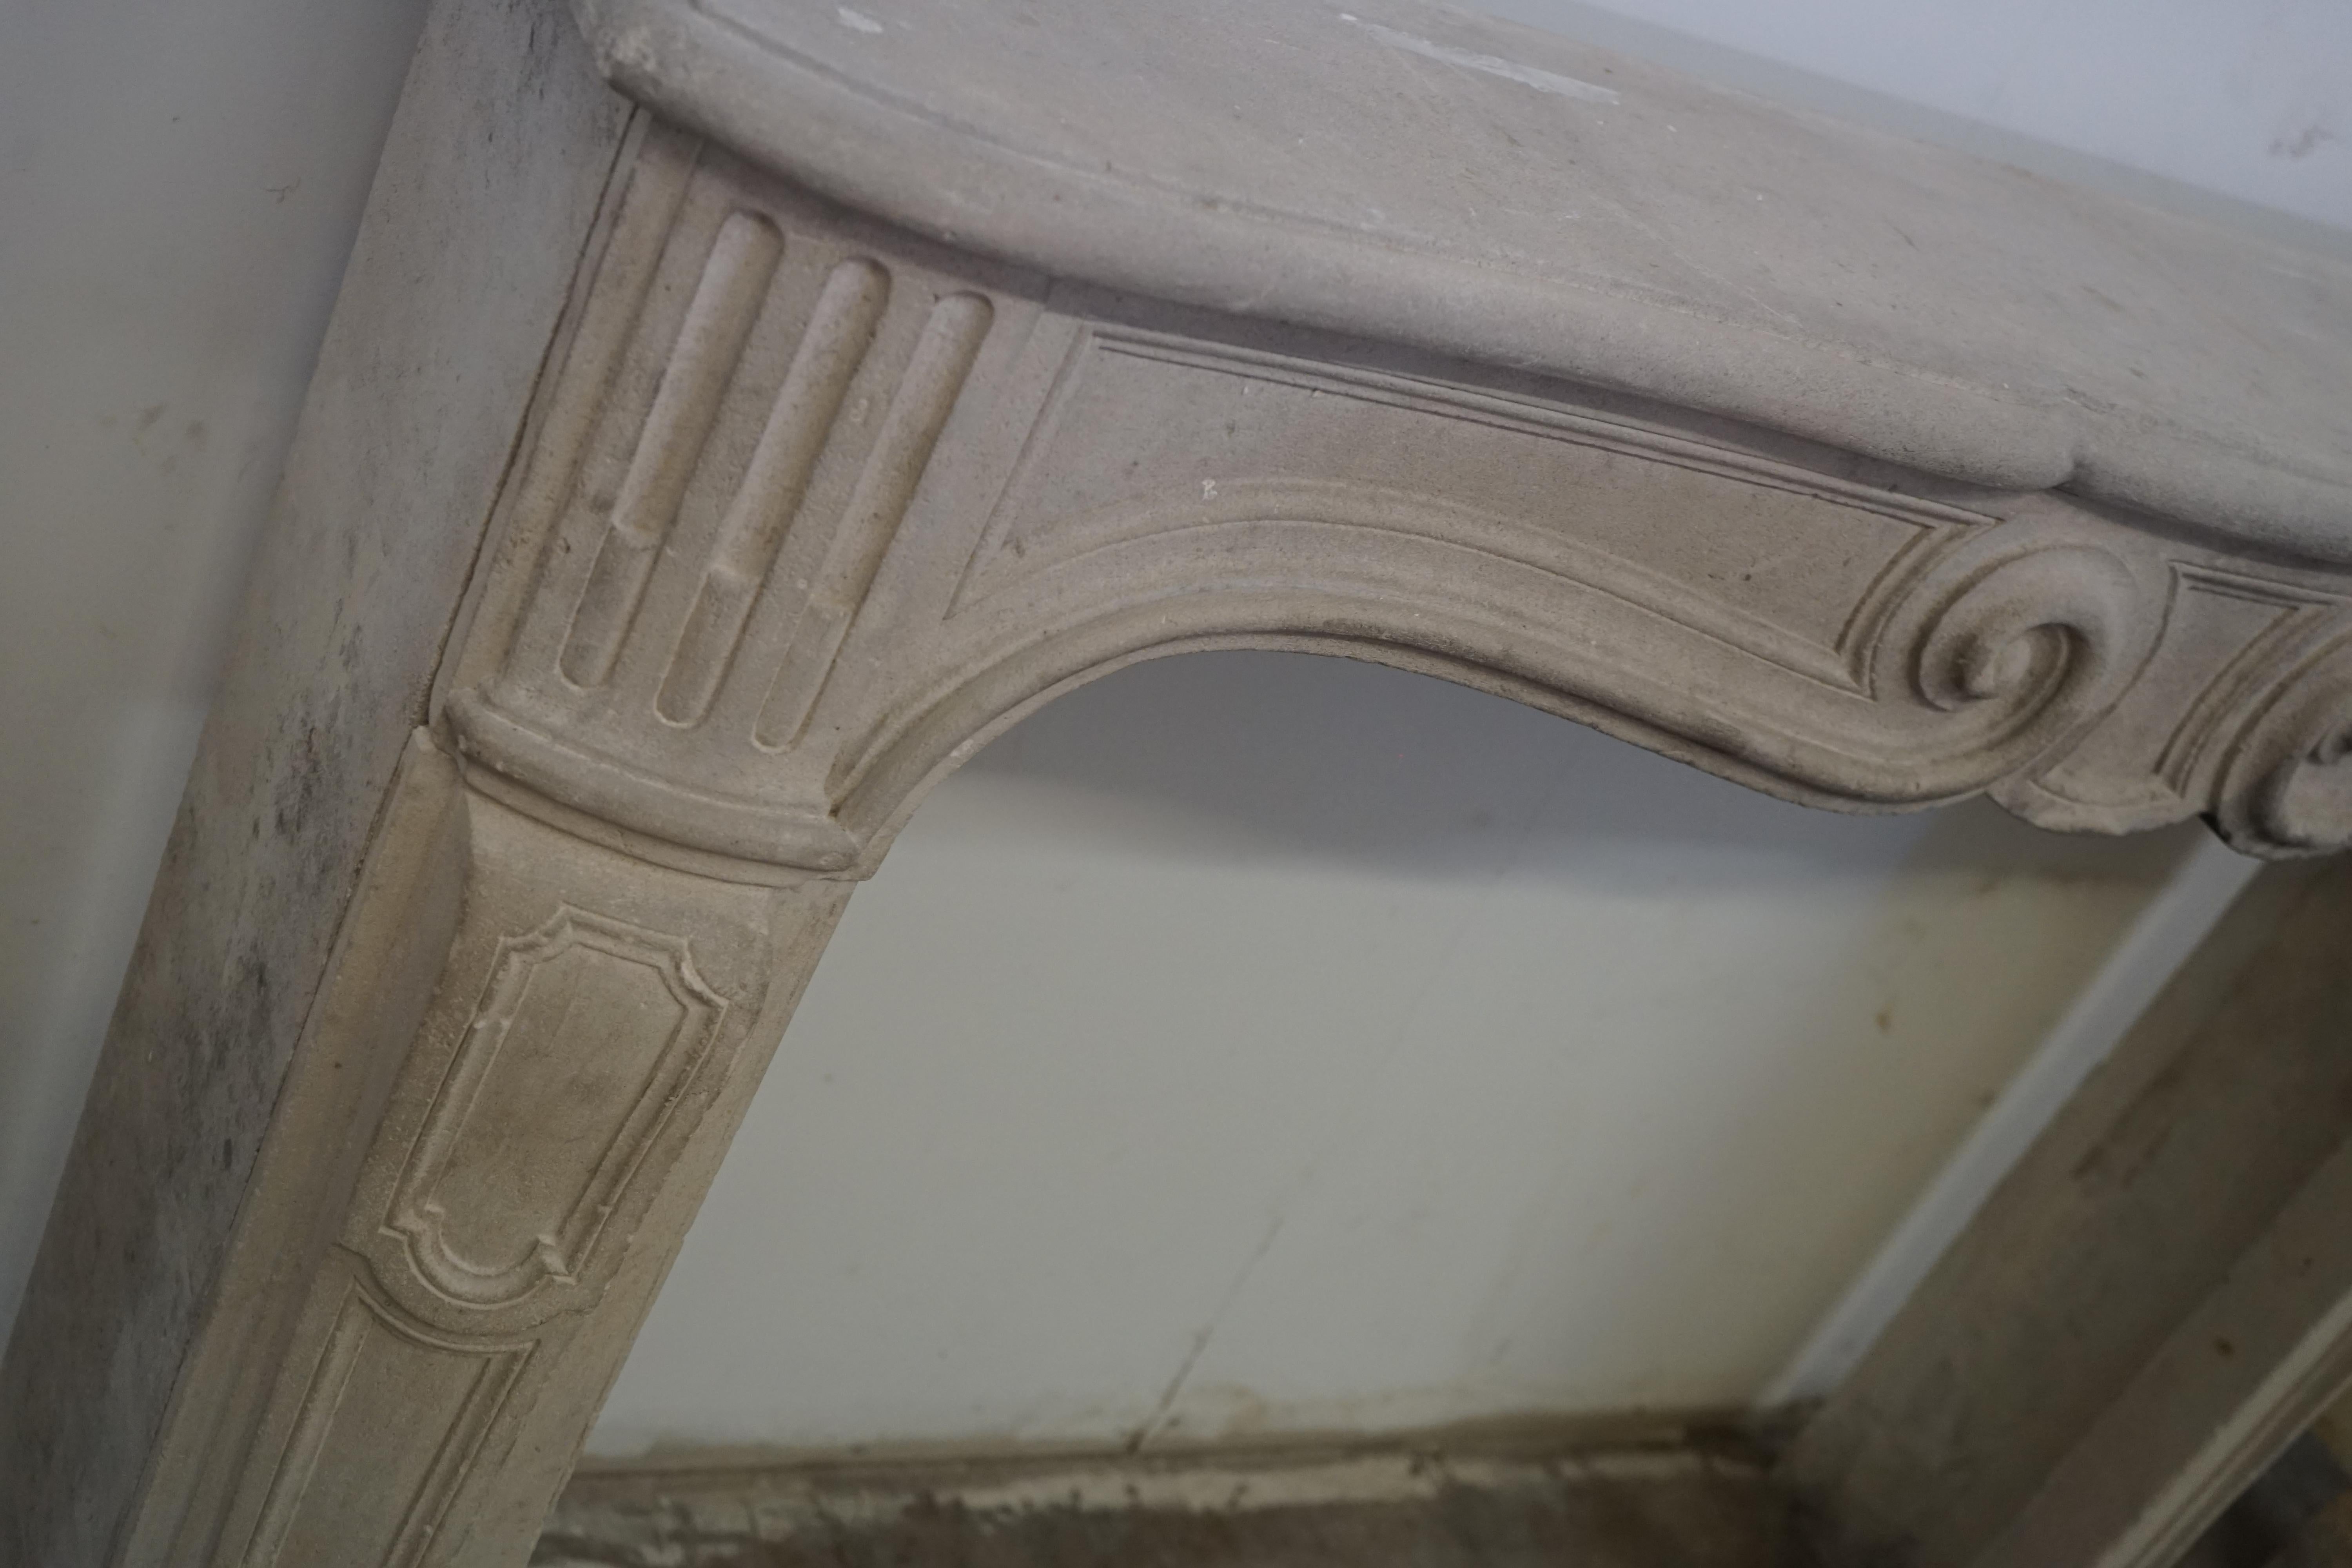 A very beautiful antique Burgundy limestone. The mantel has a decorated shelf with straight legs. It's from the 18th century in the style of King Louis XIV. The mantel has even proportions perfect for a bedroom or breakfast room mantel.